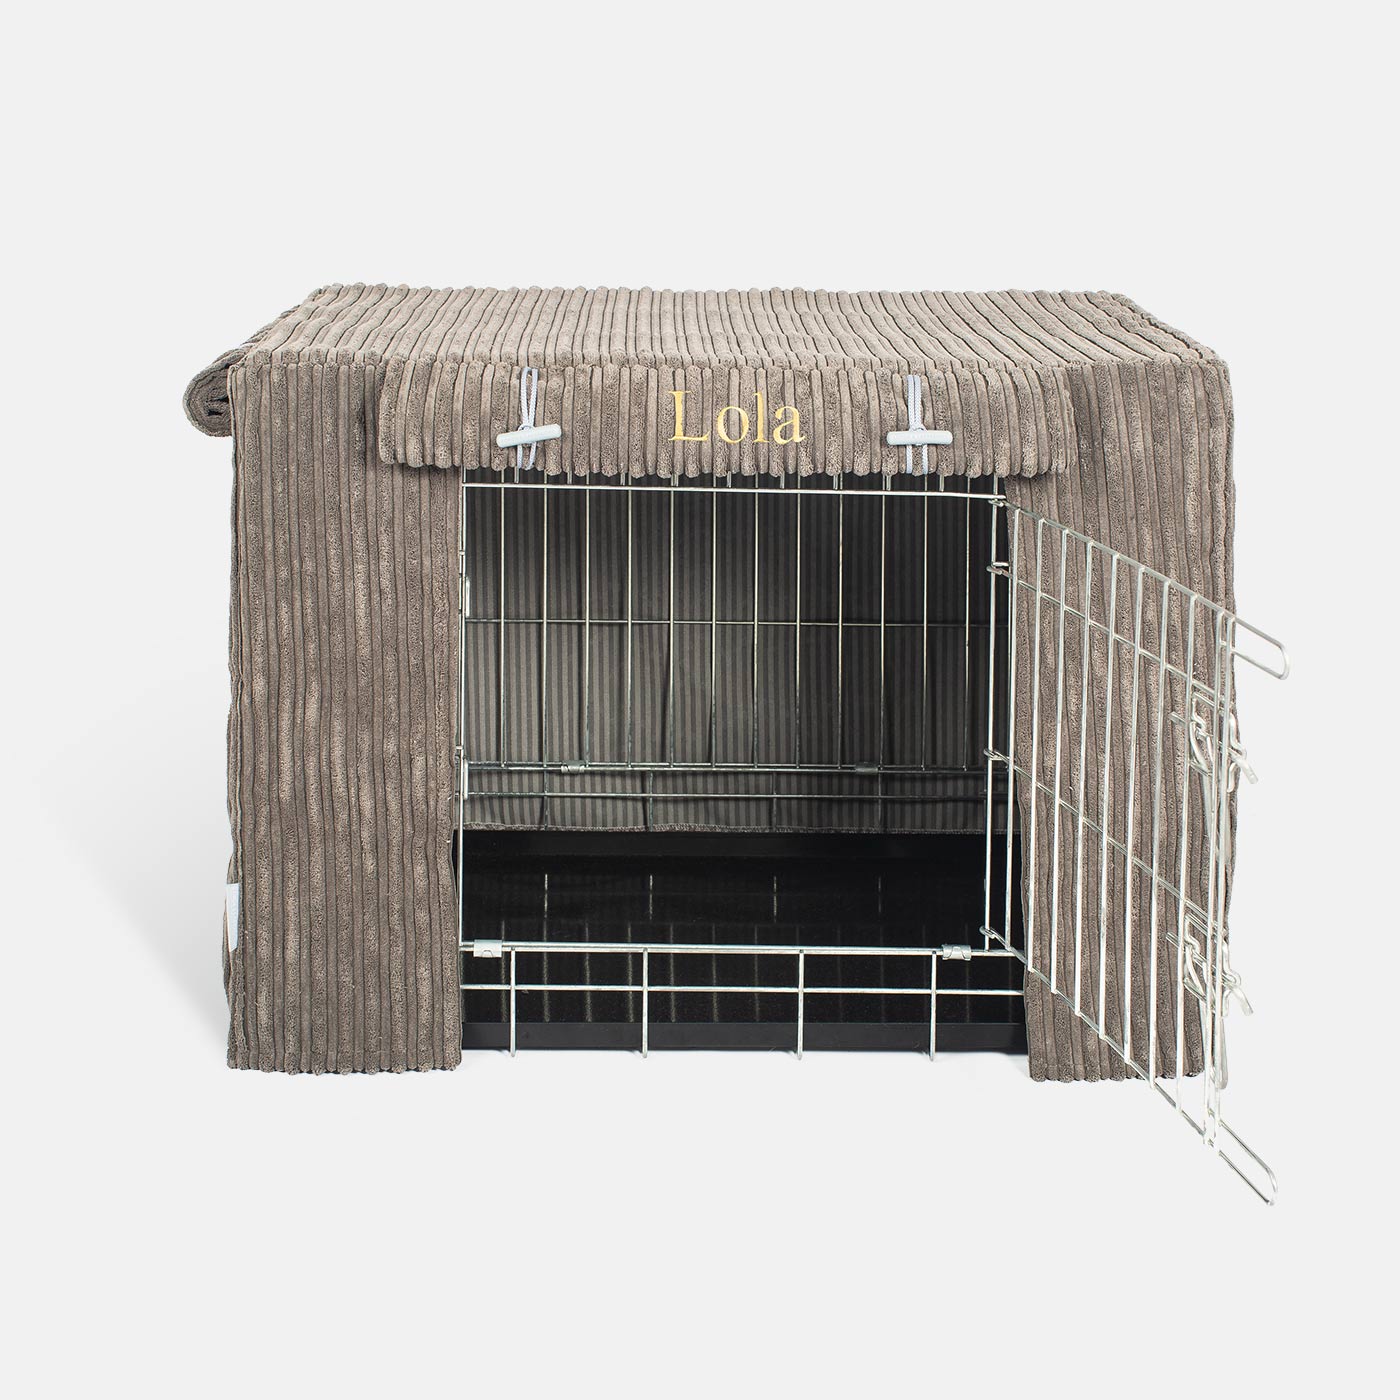 Luxury Dog Cage Cover, Essentials Plush Dark Grey Cage Cover!  The Perfect Dog Cage Accessory, Available To Personalize Now at Lords & Labradors US